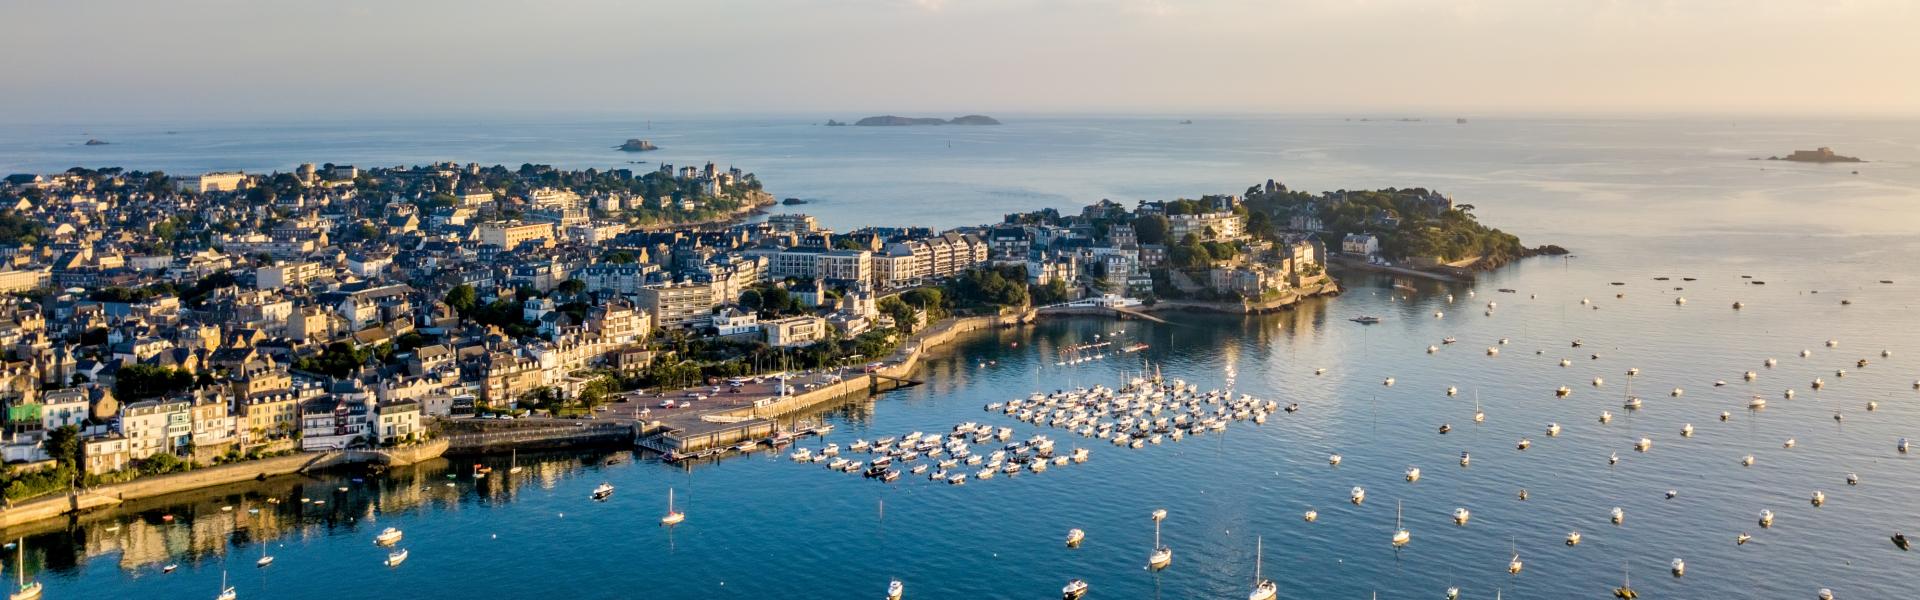 Find the perfect vacation home in Dinard - Casamundo